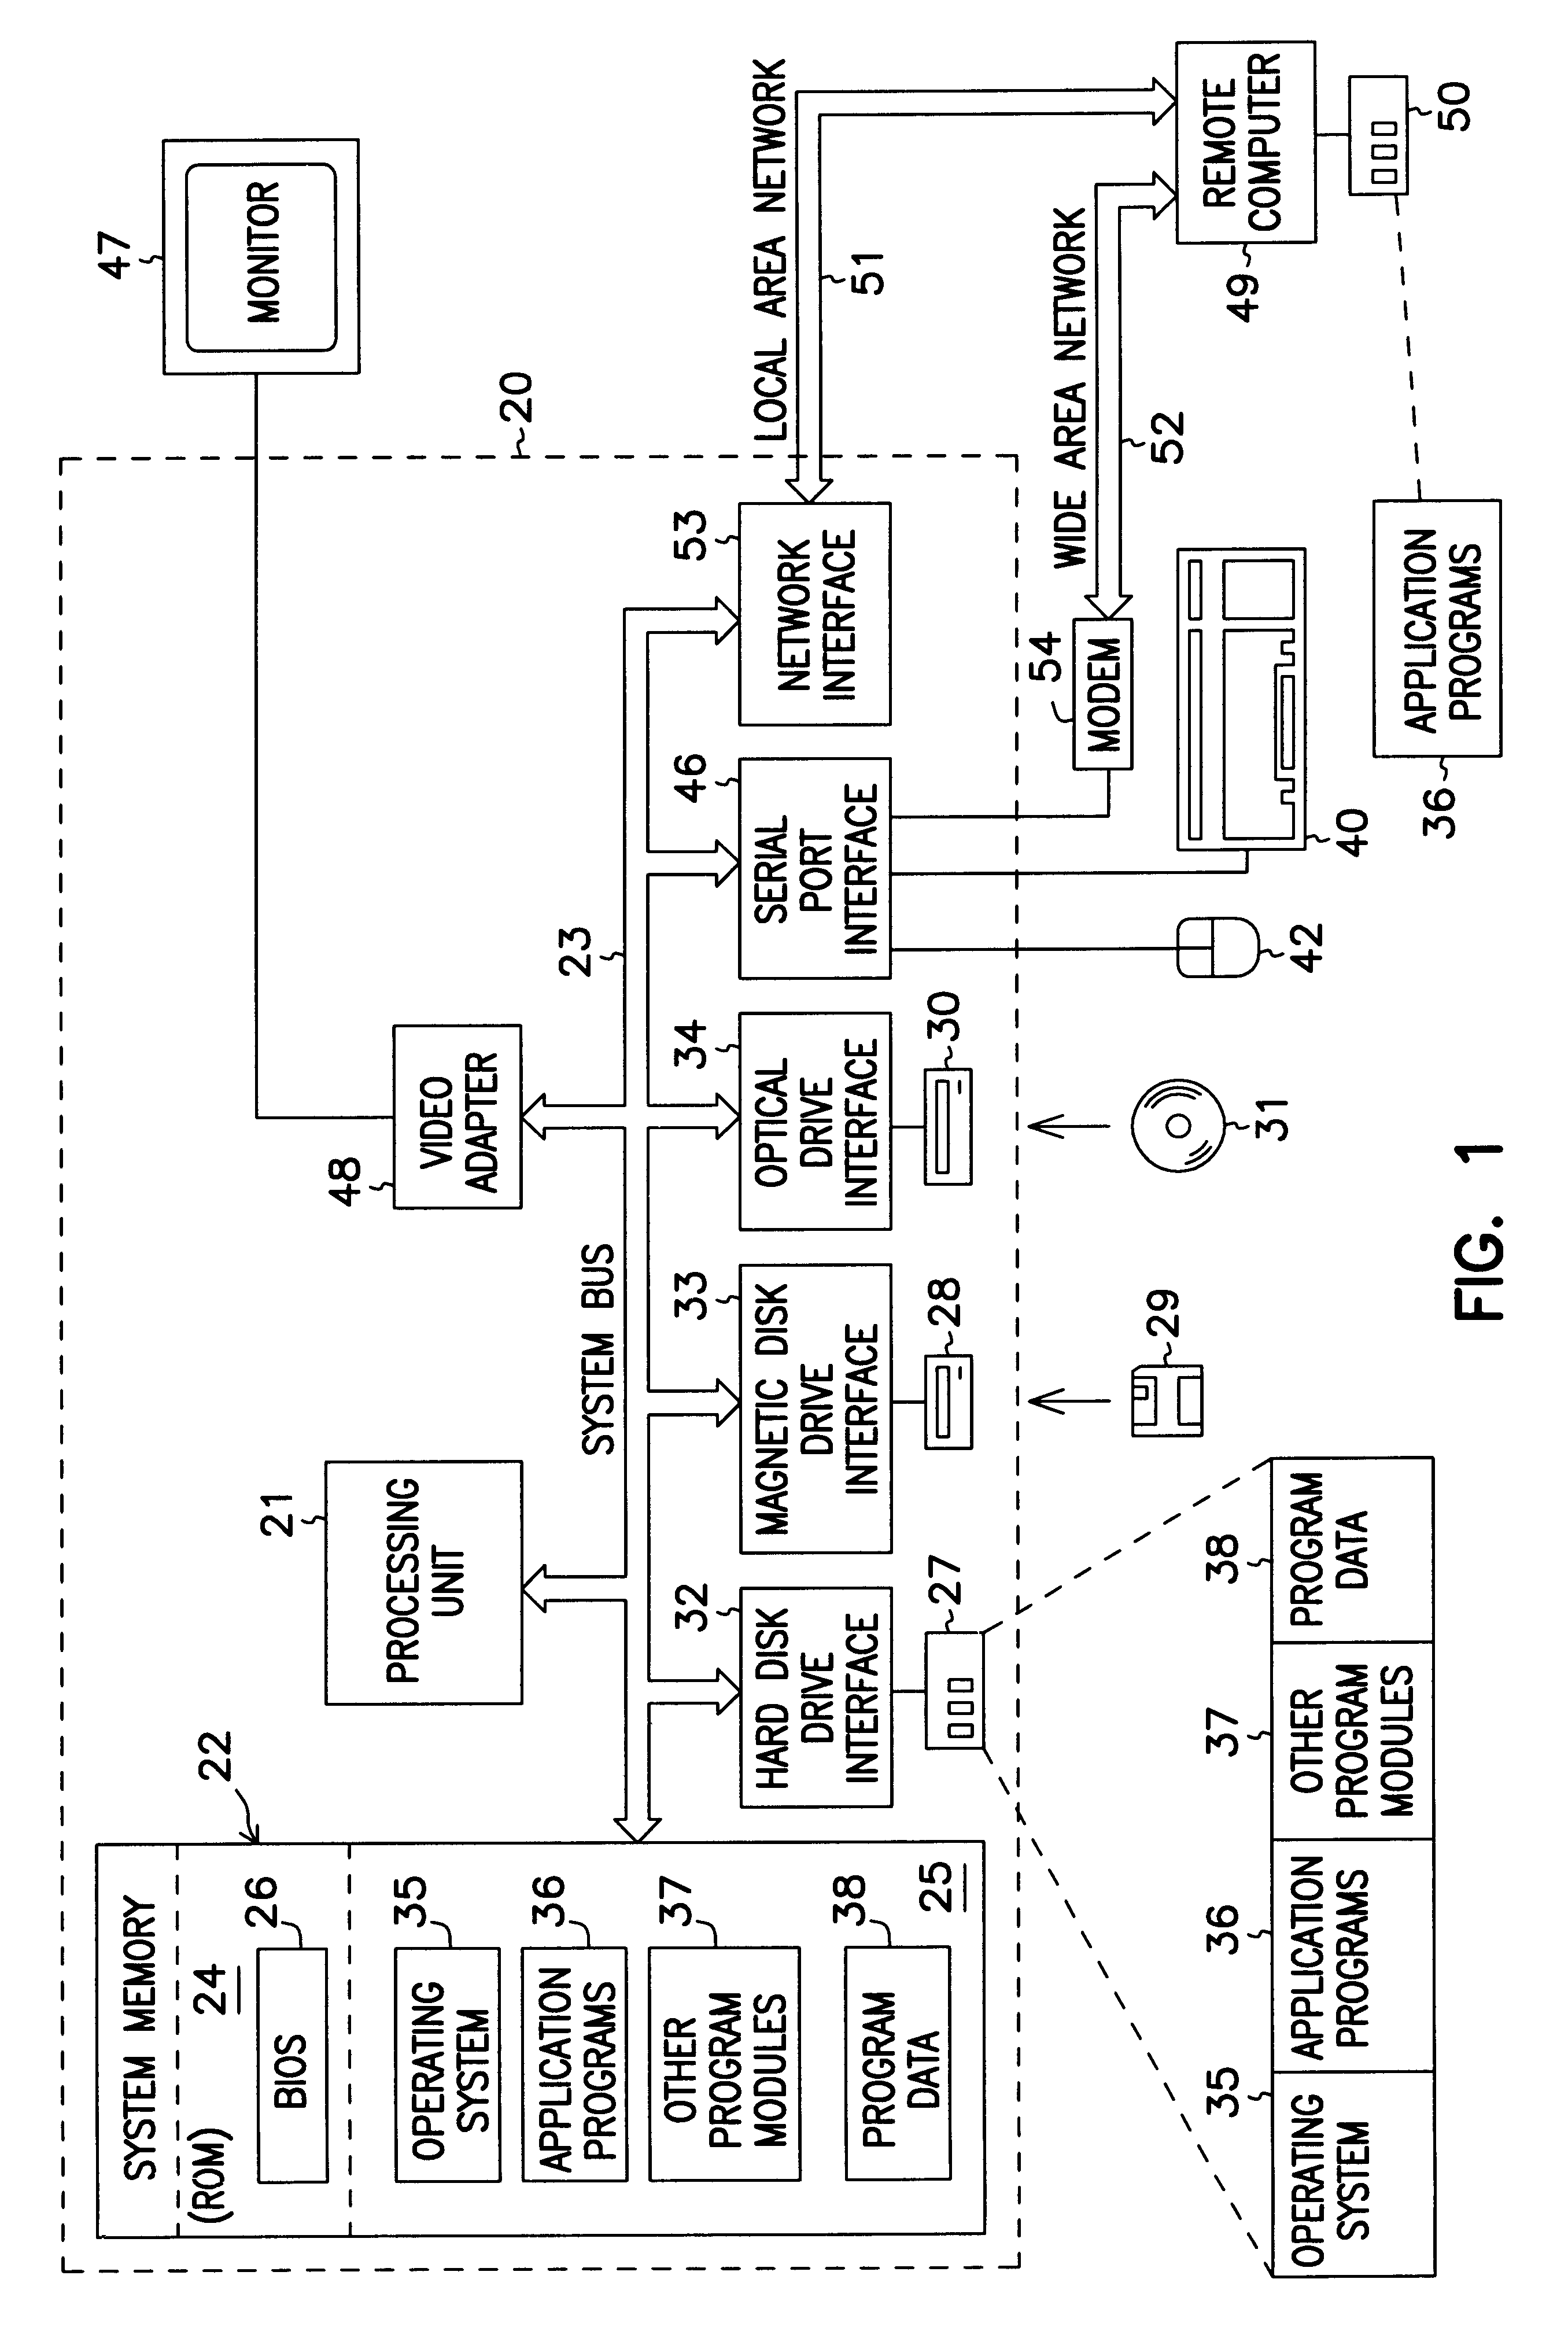 User mode device driver interface for translating source code from the user mode device driver to be executed in the kernel mode or user mode